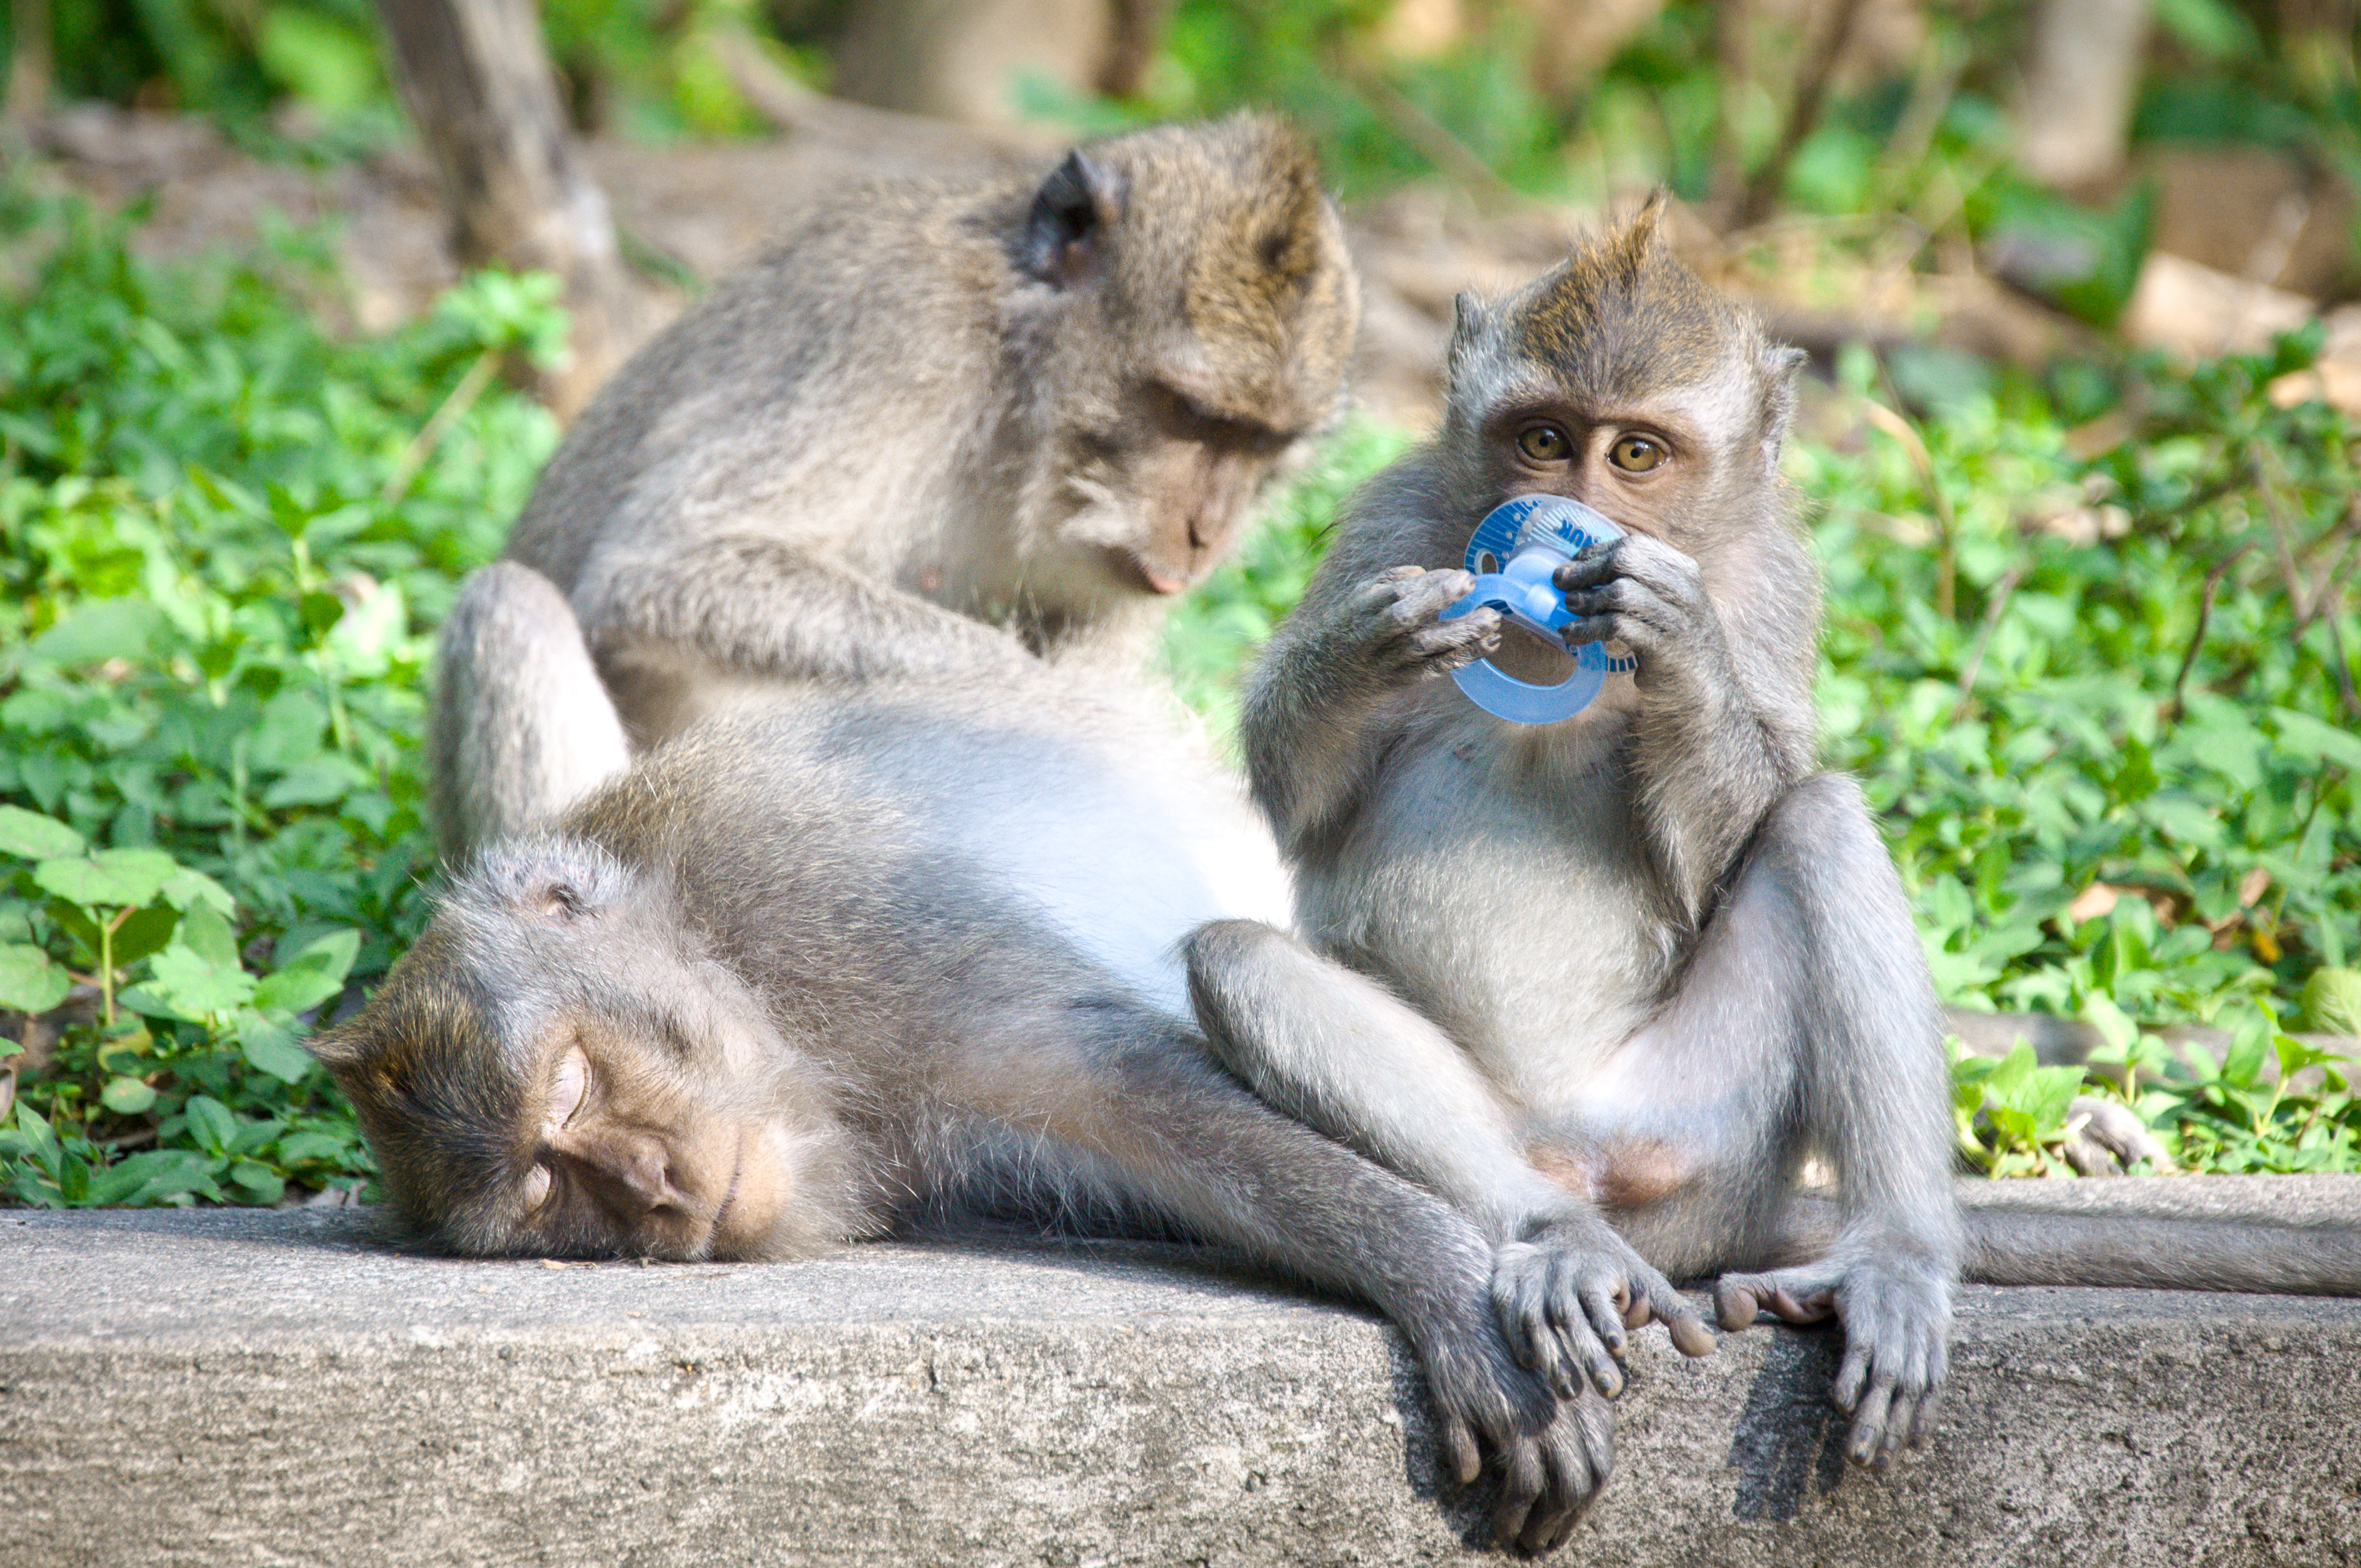 Monkey mother and baby, Ancestor, Photo, Image, Infant, HQ Photo